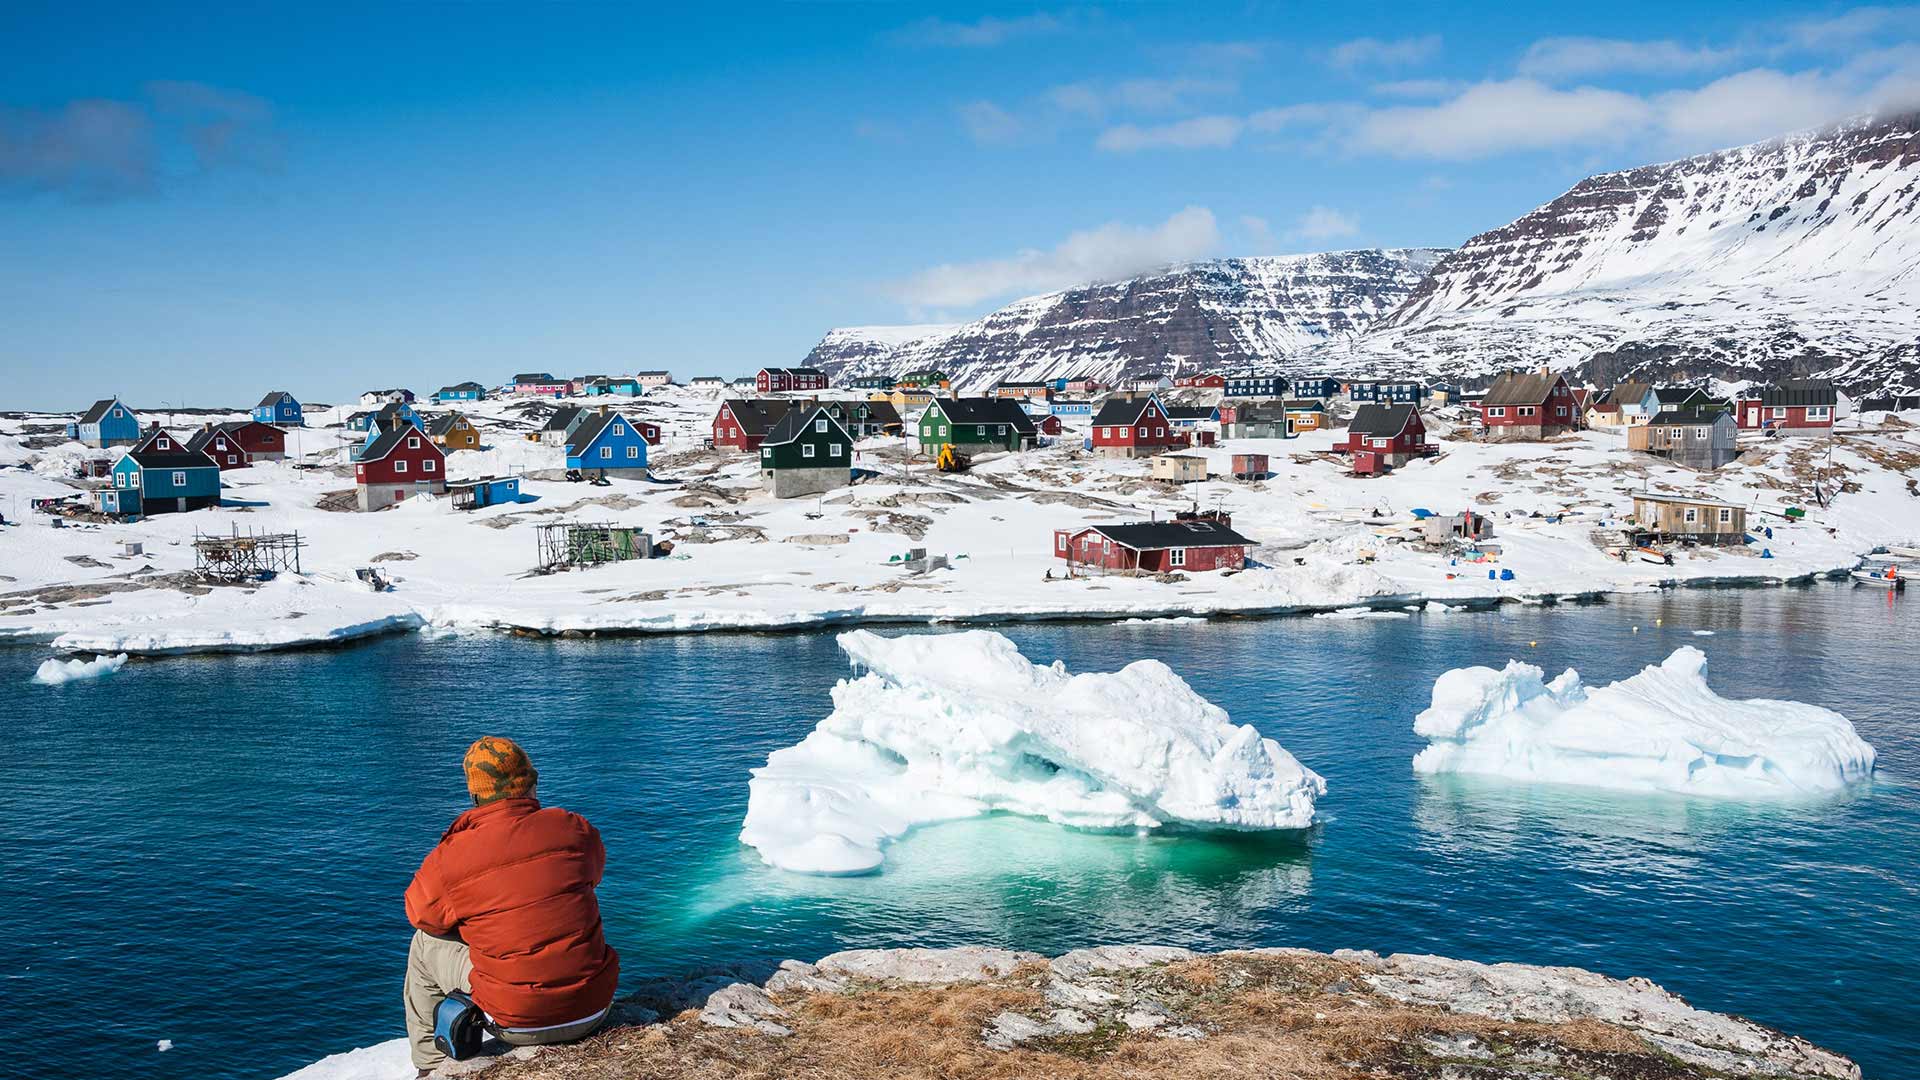 Person looking out over the icebergs and colourful houses of Qeqertarsuaq, Greenland